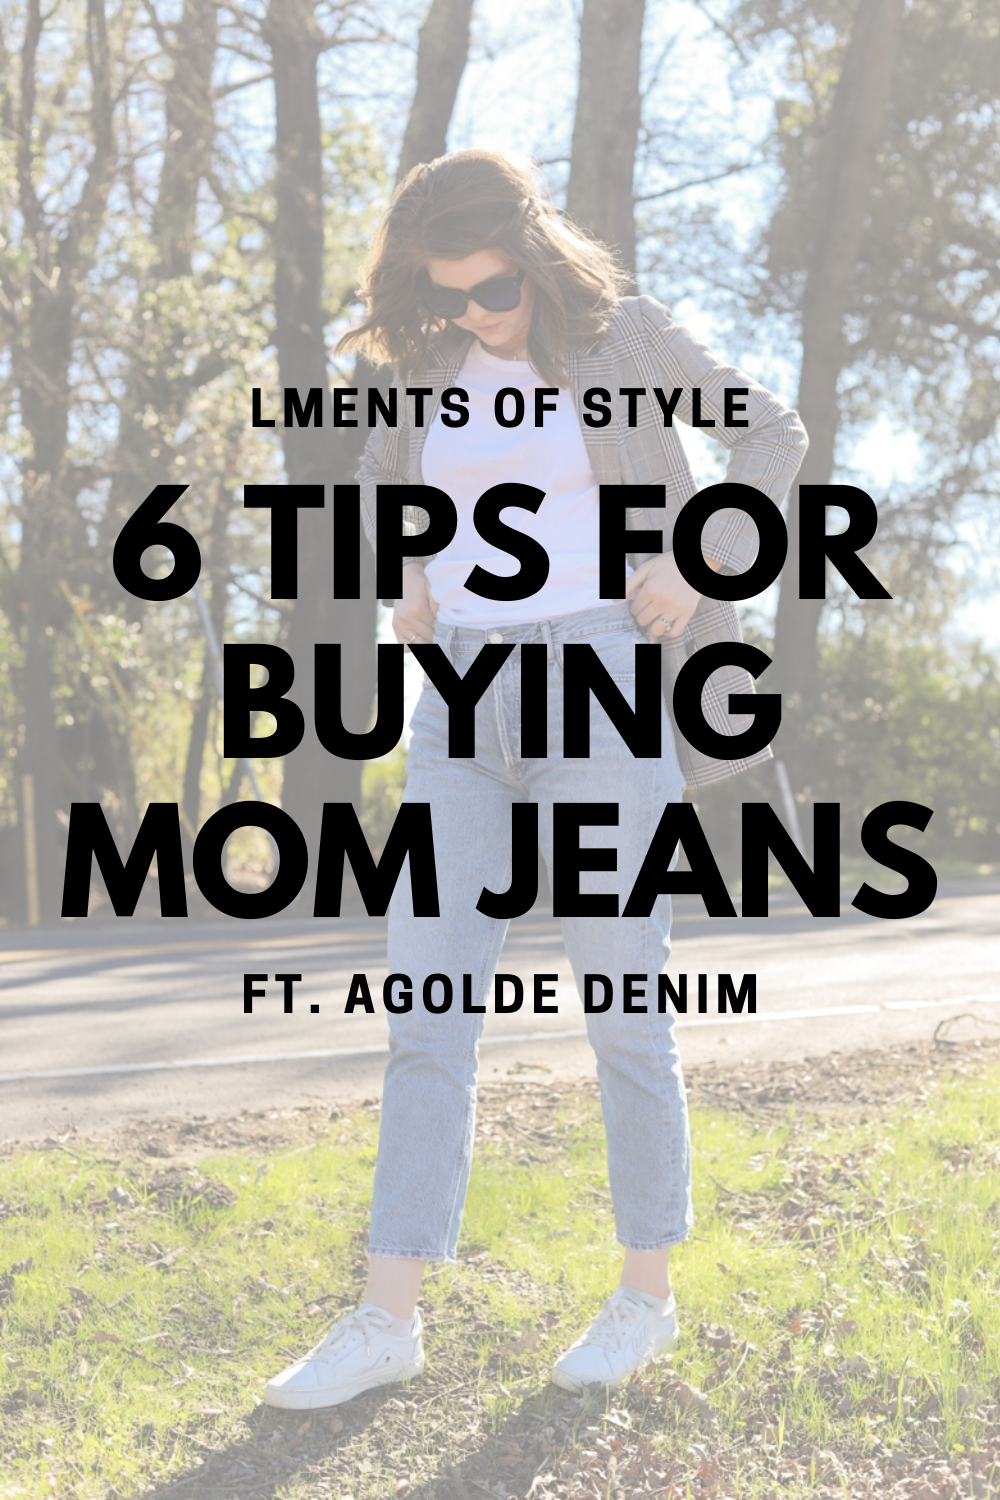 mom jeans, agolde denim, lments of style, ellemulenos, riley, sizing, worth the money, stretch, sustainable denim, 6 tips for buying mom jeans